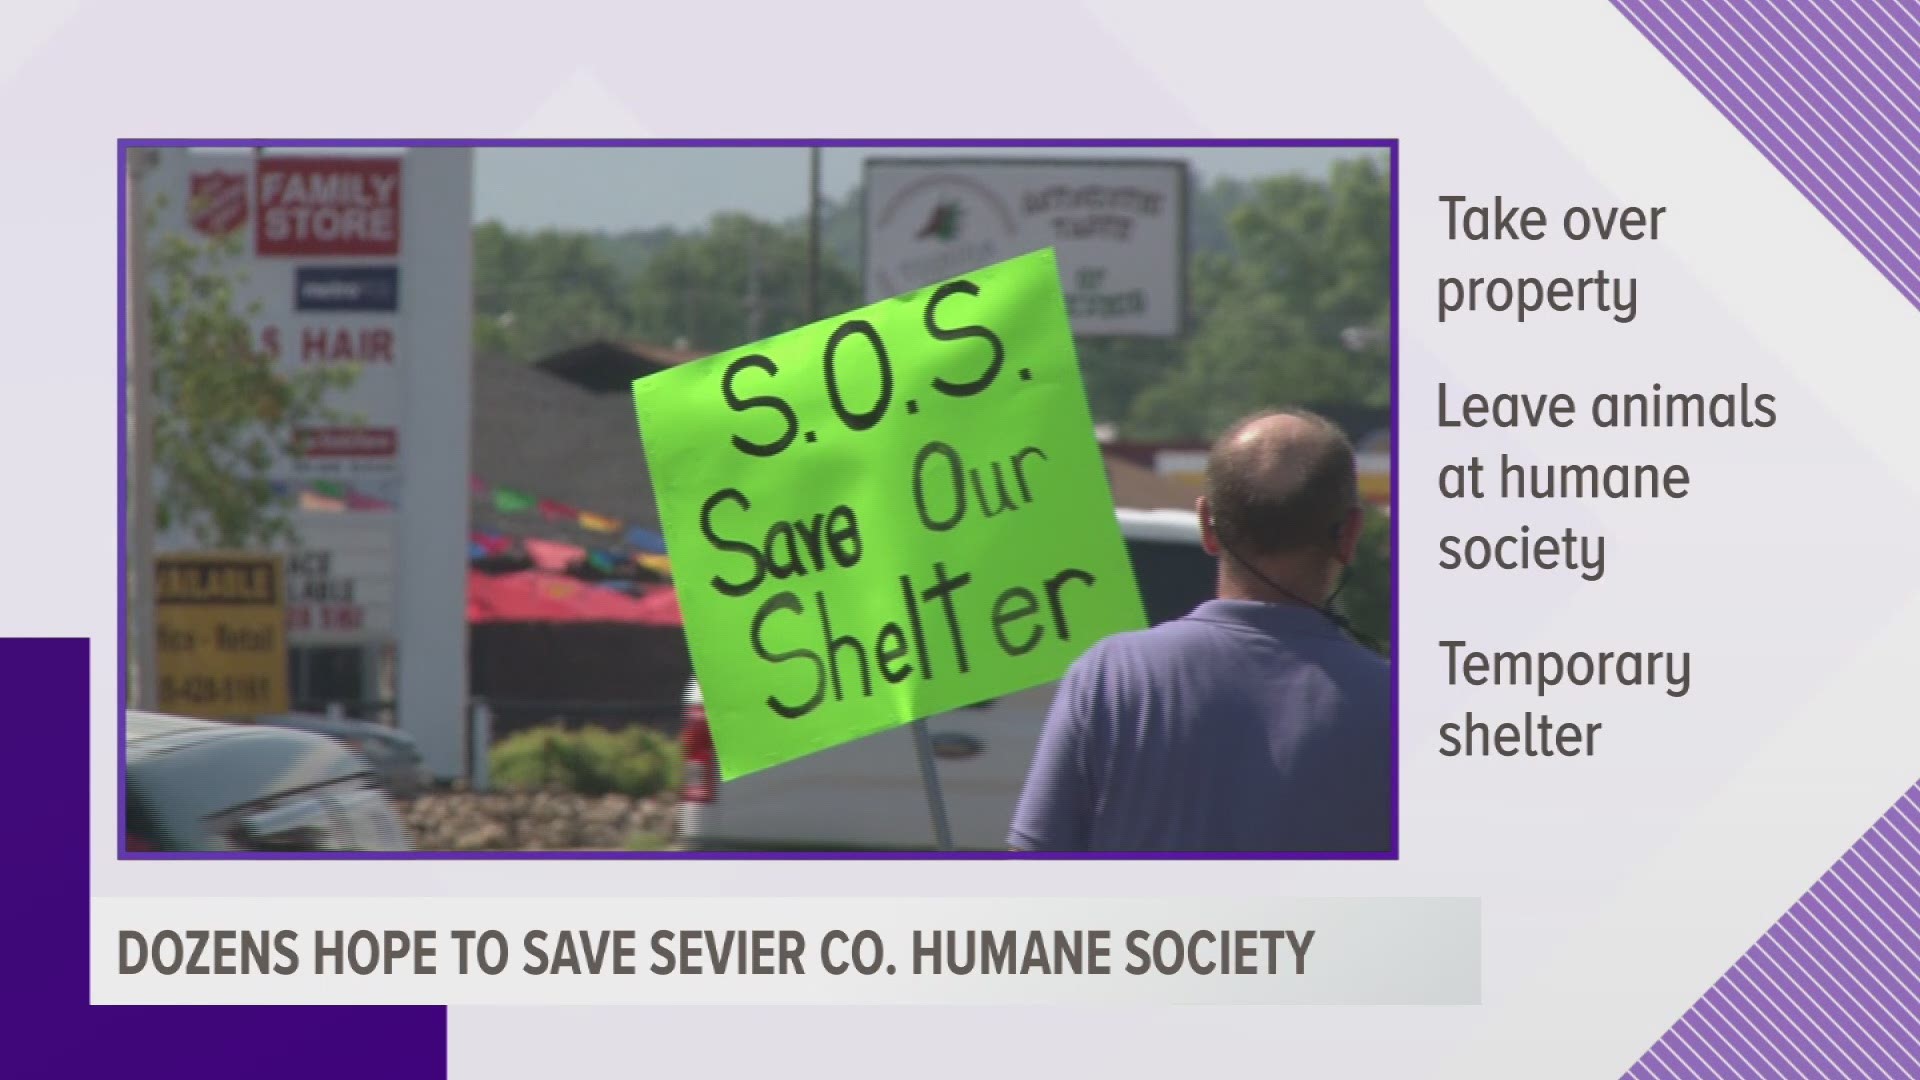 Dozens of people took to the streets today because they don't want Sevier County to take over the humane society's property.